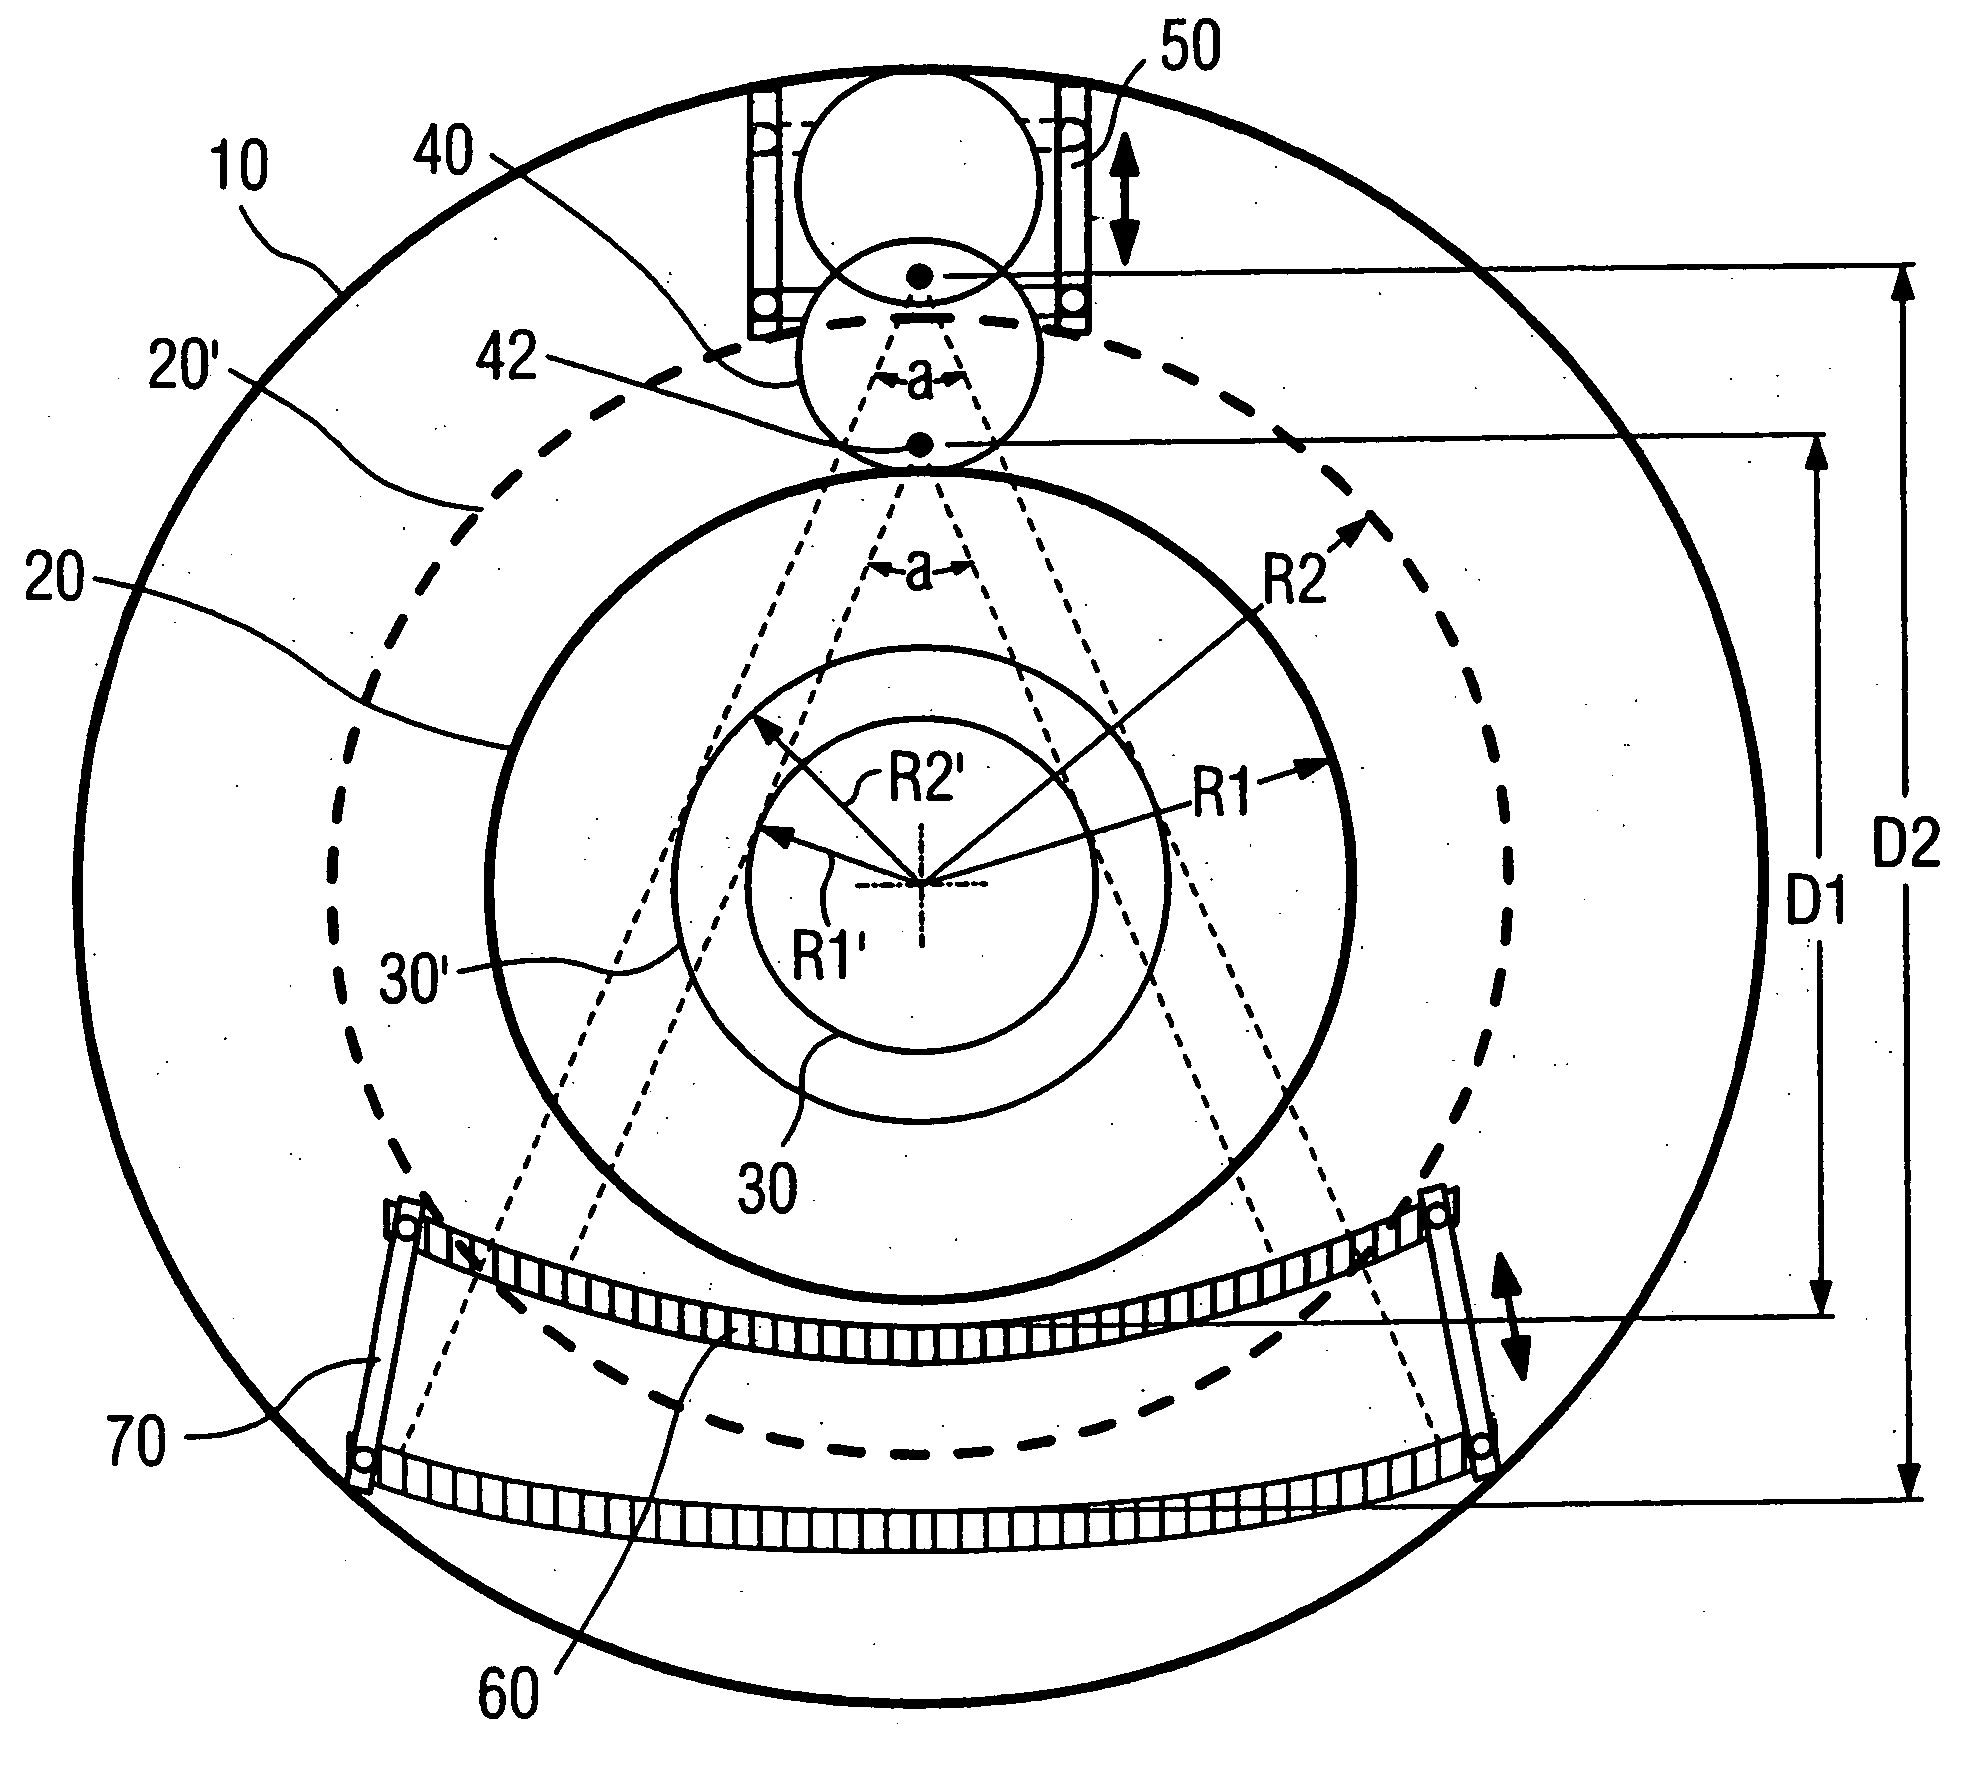 Computed tomography system with adjustable focal spot-to-detector distance